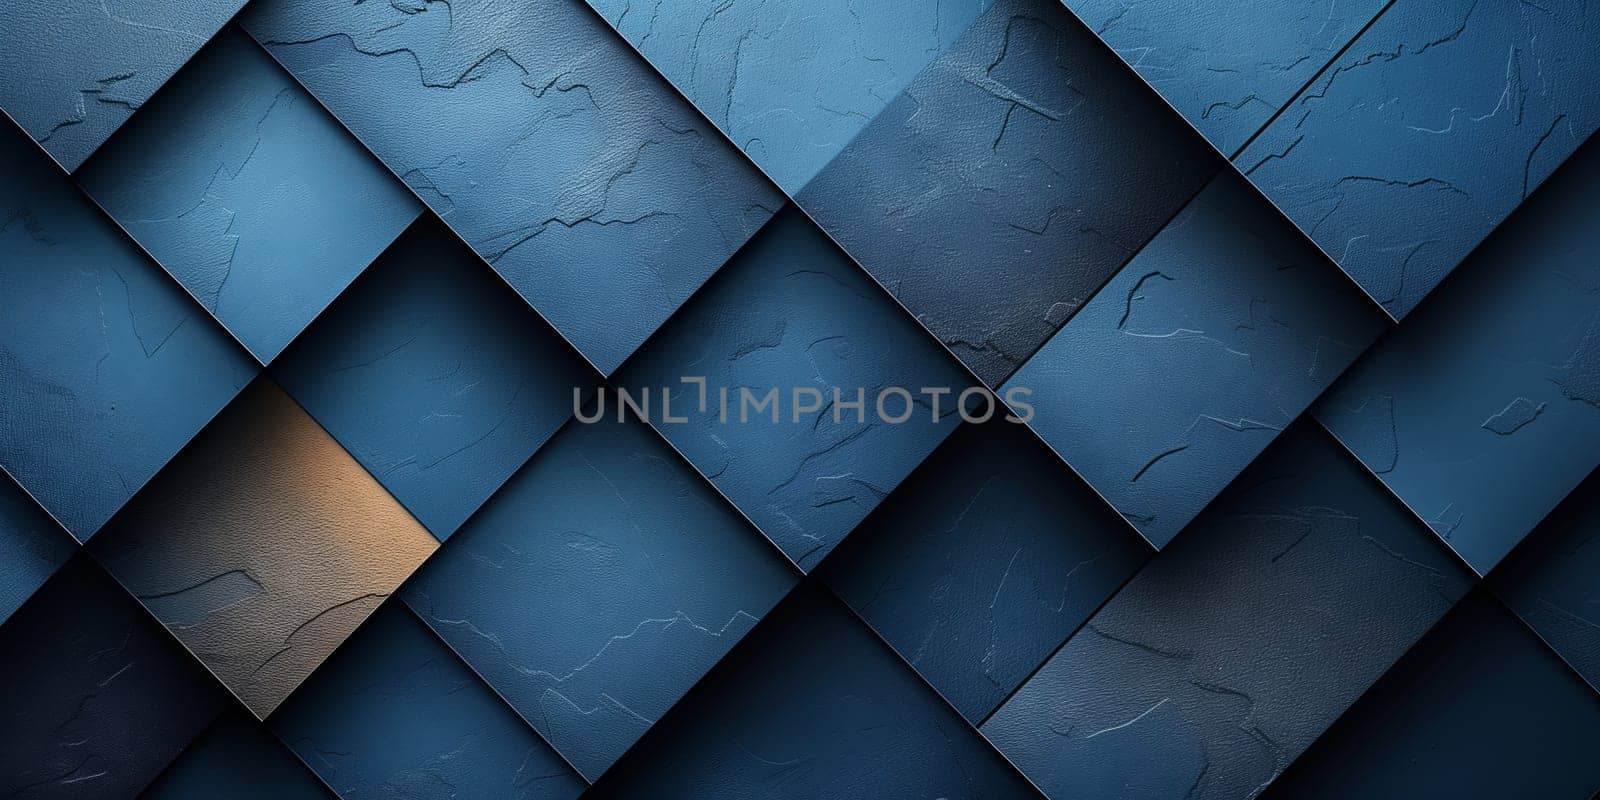 A close up of a grey composite material wall with a geometric pattern of electric blue rectangles. The tints and shades create a striking flooring design